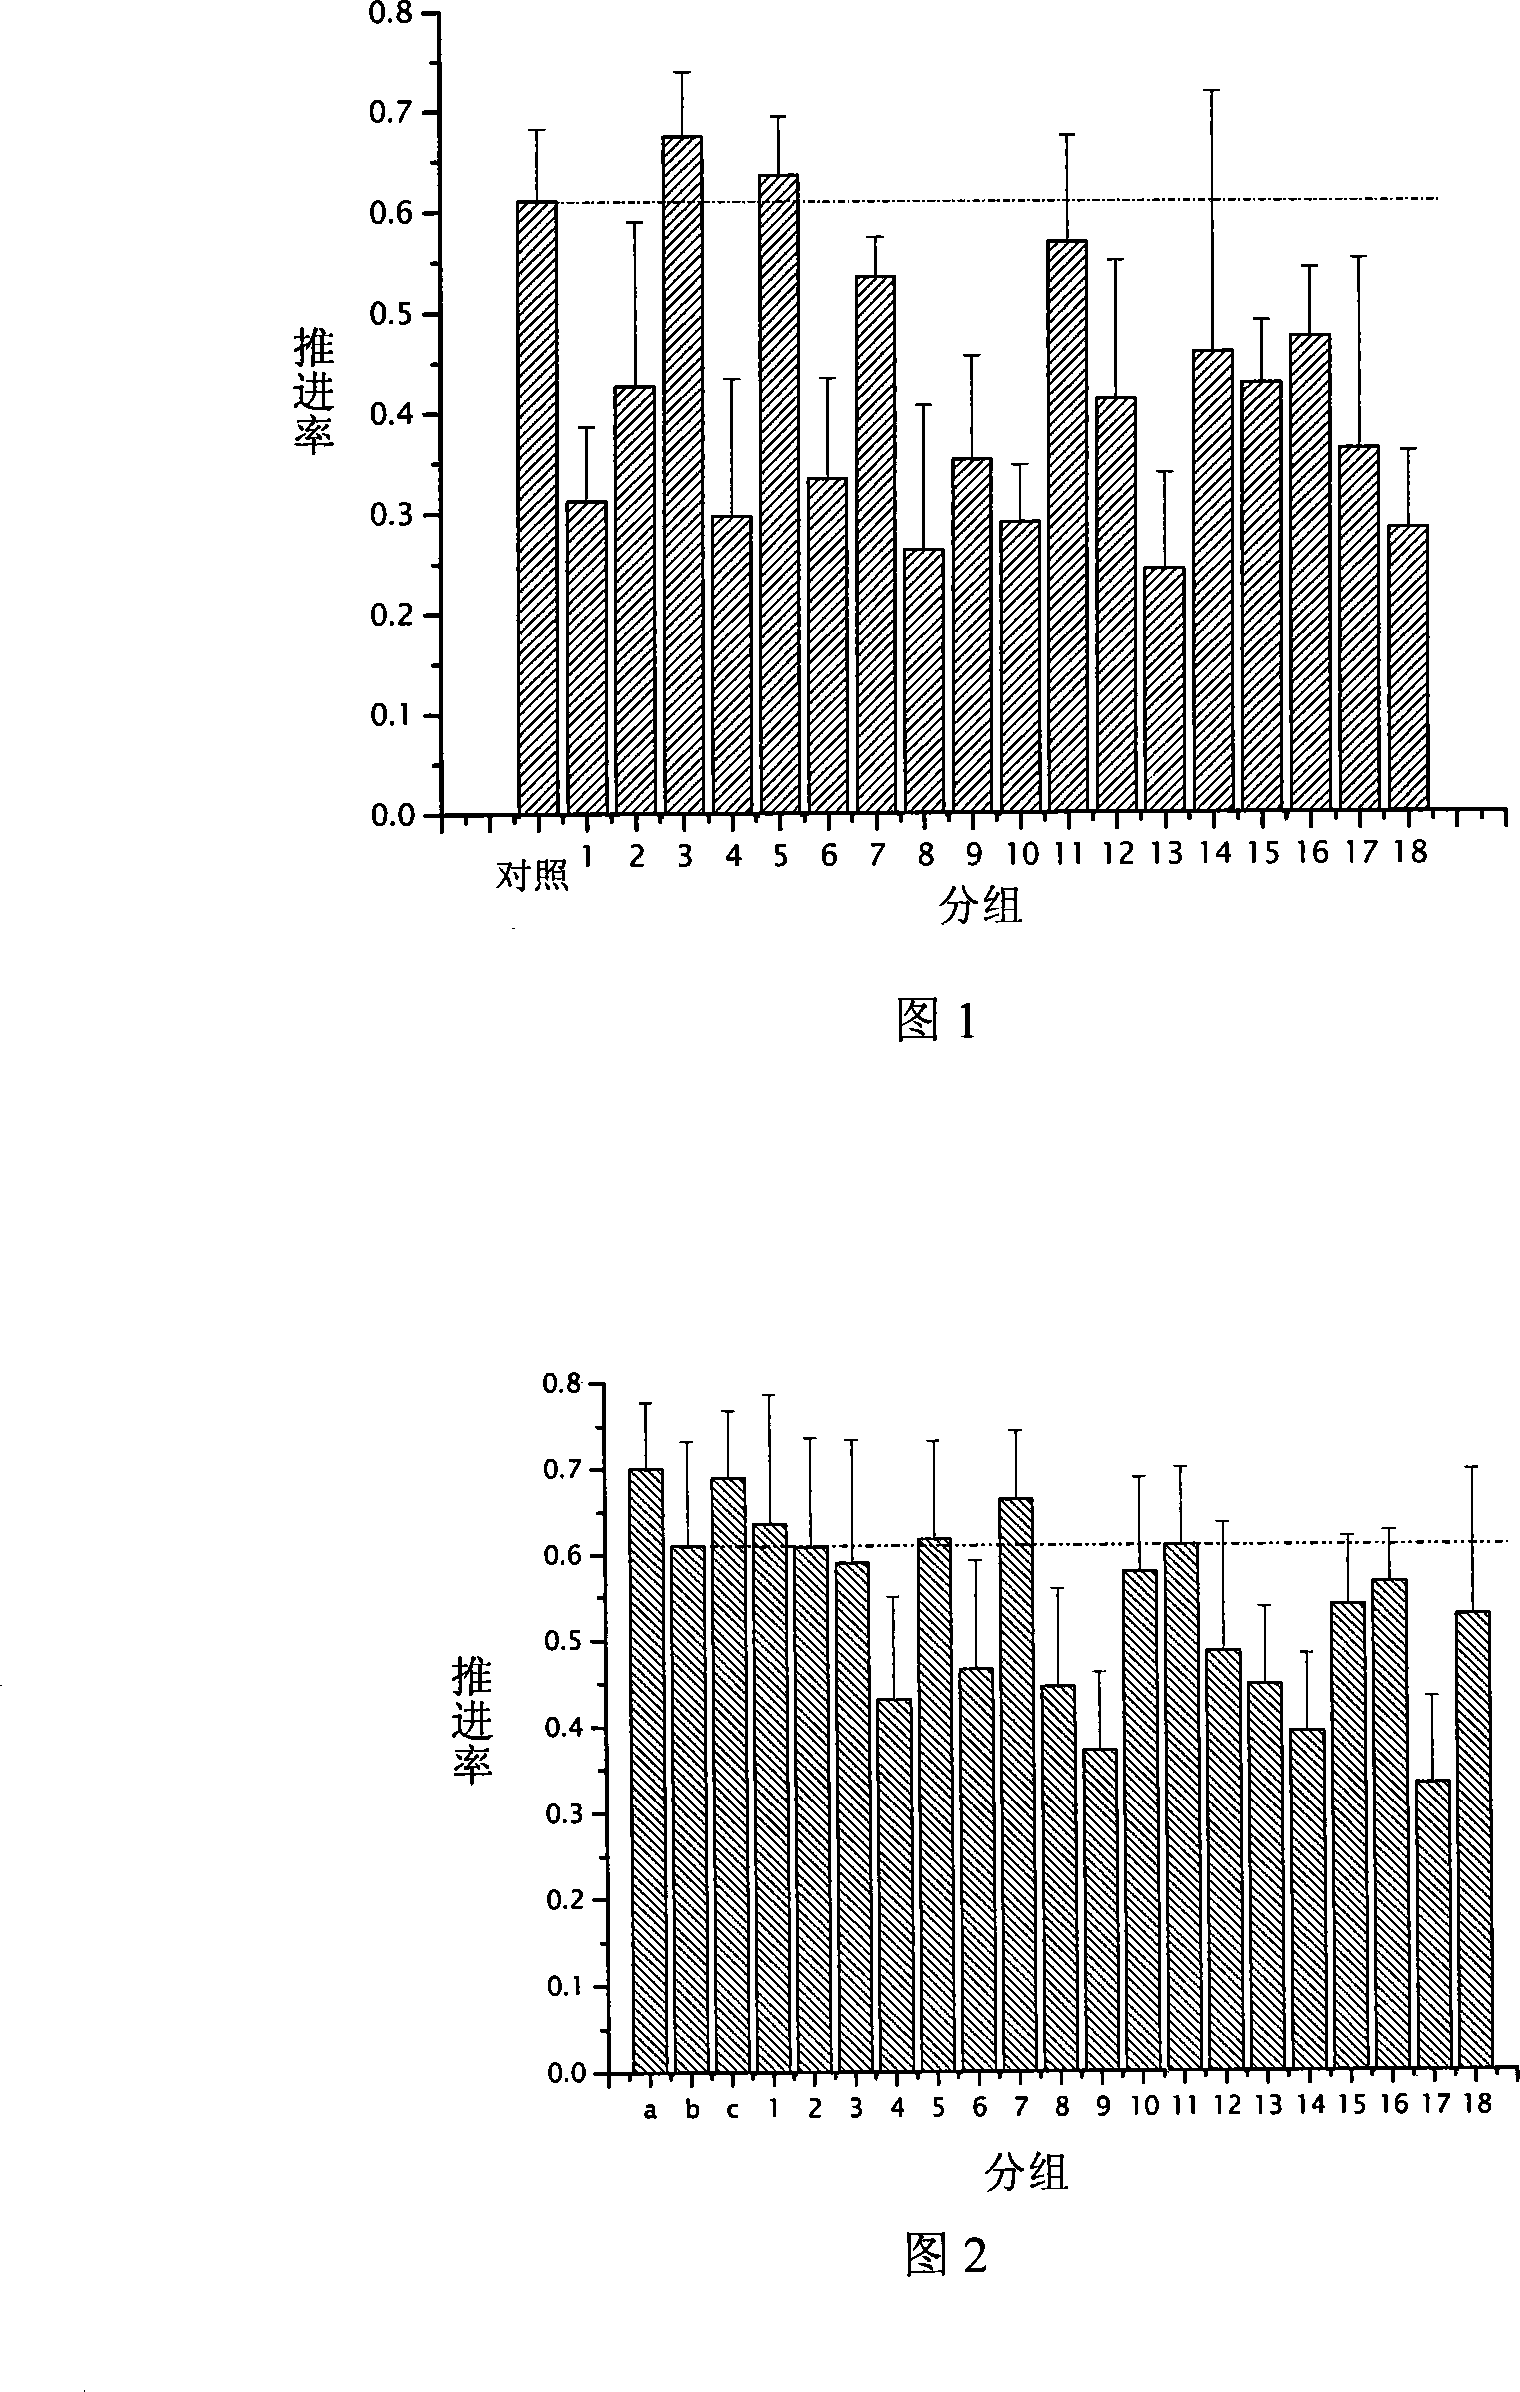 Composition capable of bidirectional adjusting gastrointestinal smooth muscle contraction